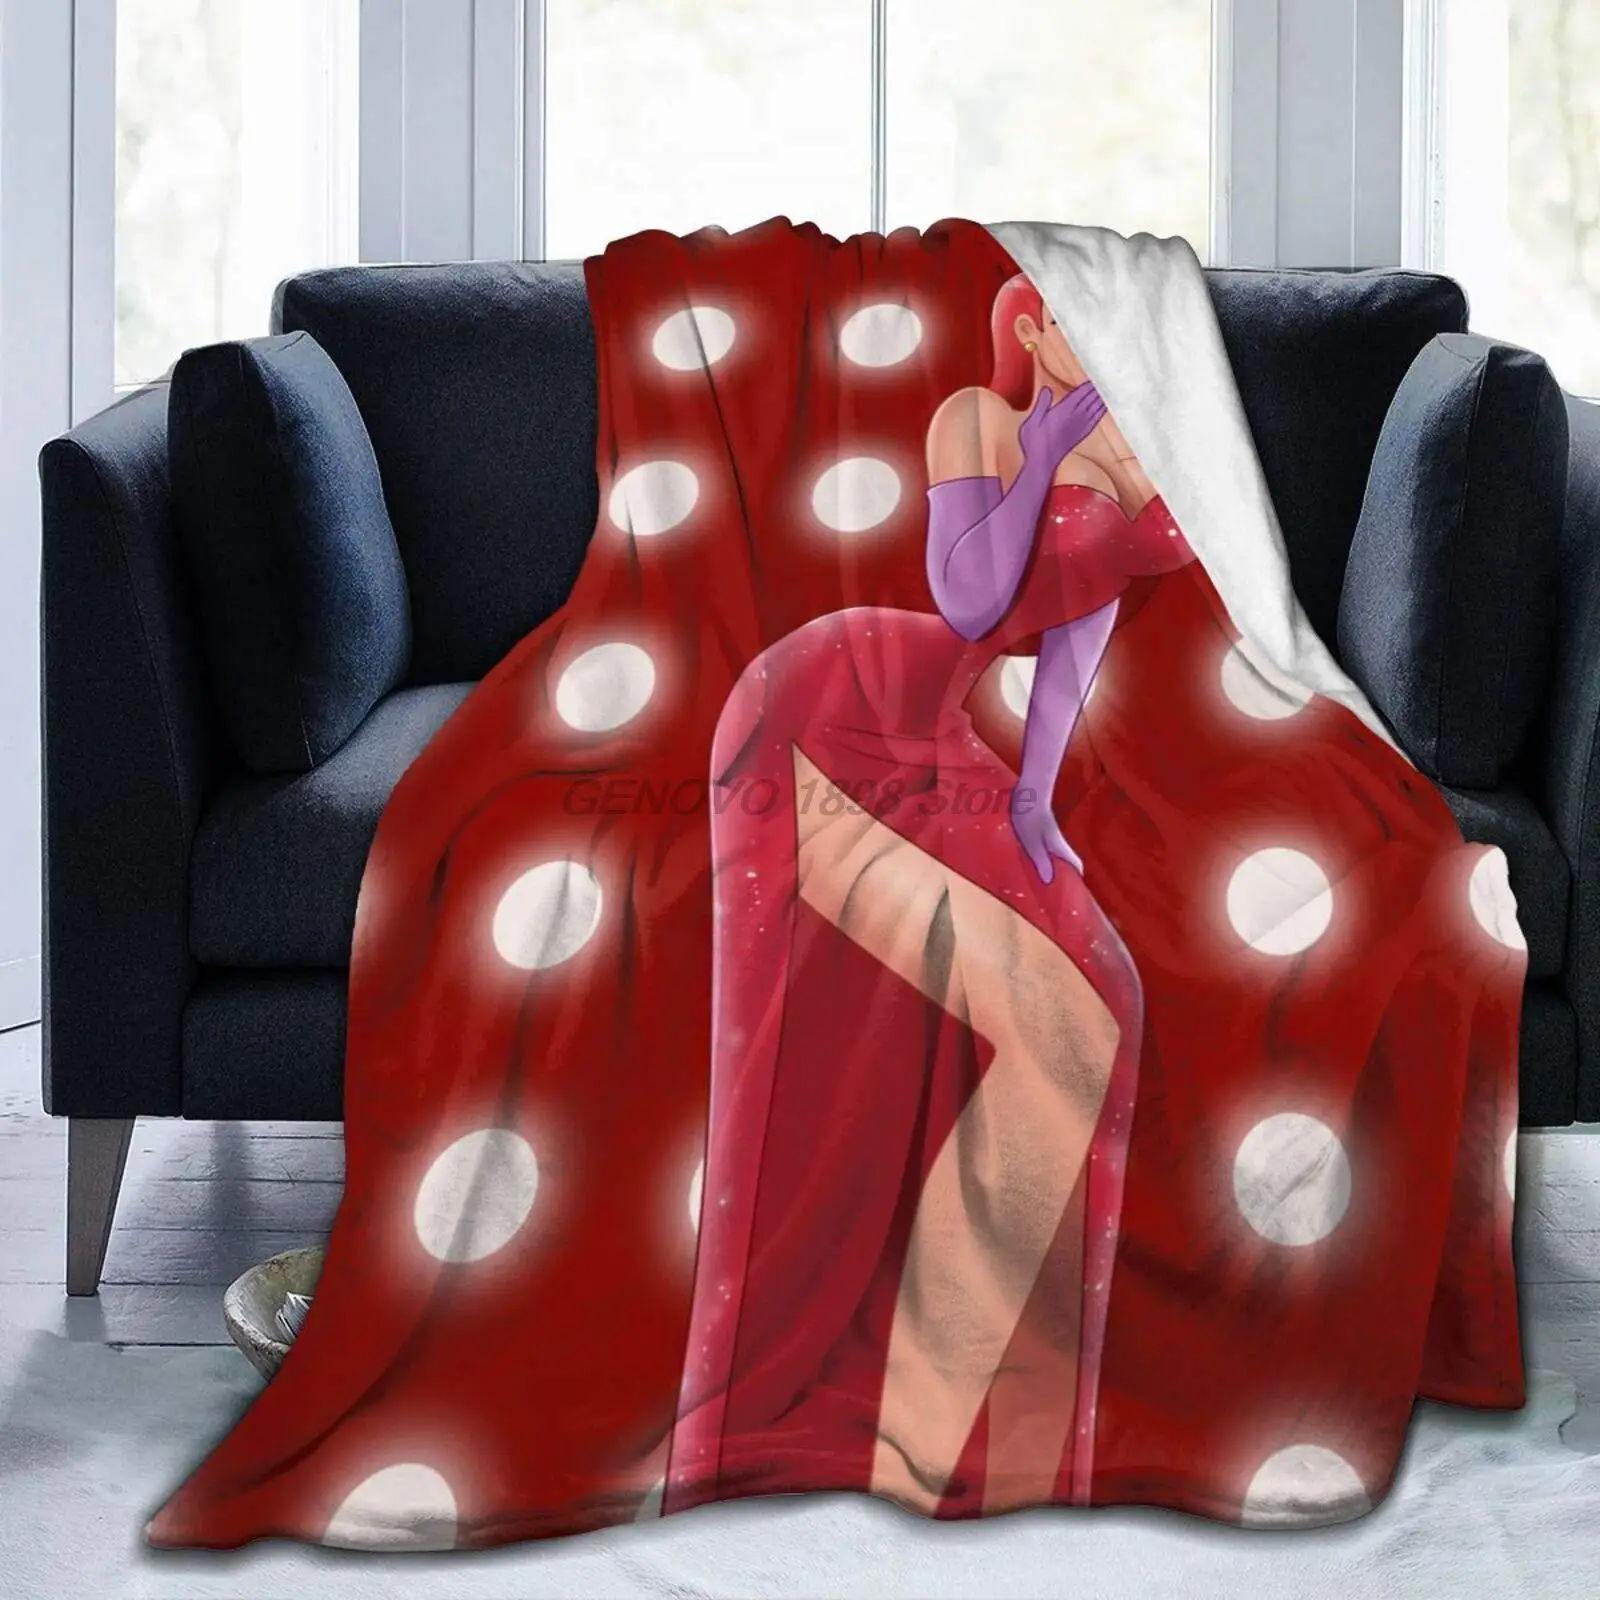 

Jessica Rabbit Ultra-Soft Micro Fleece Air Conditioning Blanket for Couch/Living Room for Adults Or Kids